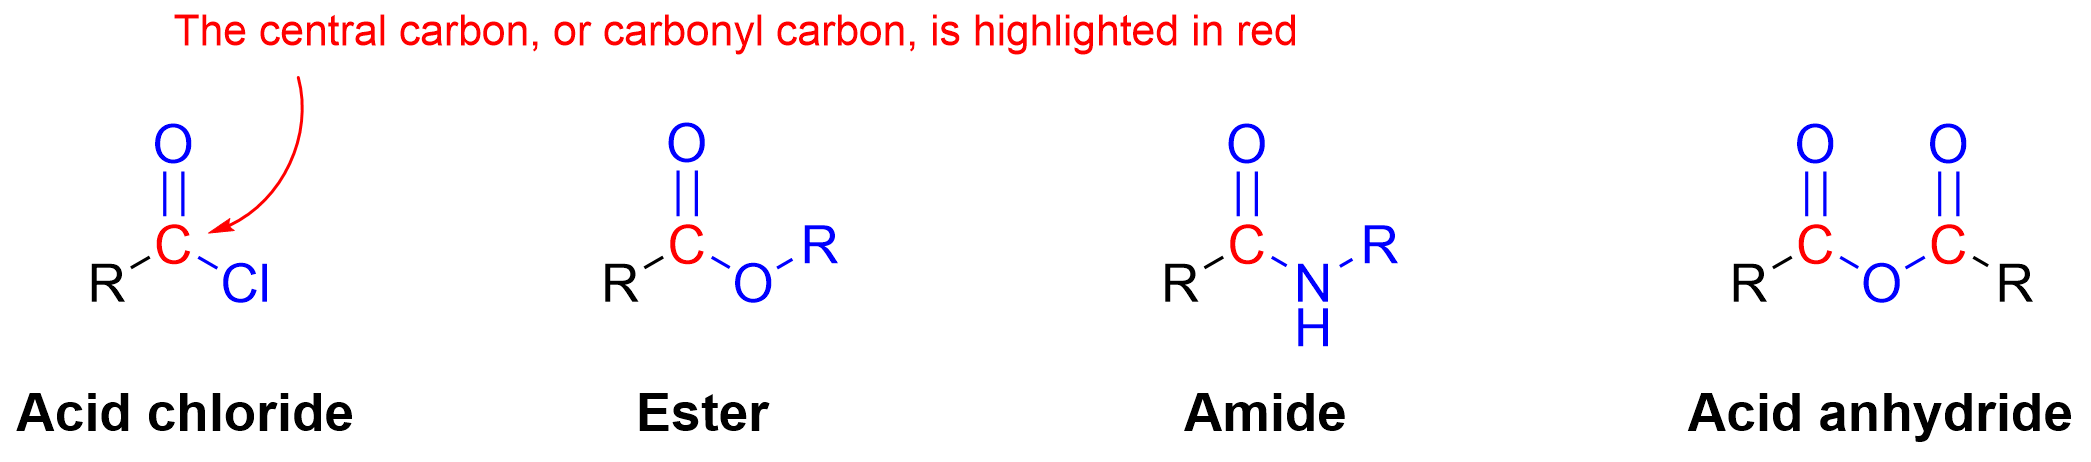 Structures of 4 carboxylic acid derivatives. First is an acid chloride where the OH group is replaced with Cl. An ester is where the OH group is replaced with an O-R group. Amides are where the OH group is replaced with an amino group such as NH2 or NH-R etc. Acid anhydrides are where the OH group is replaced with another carbonyl group, and both are connected through an O in between.